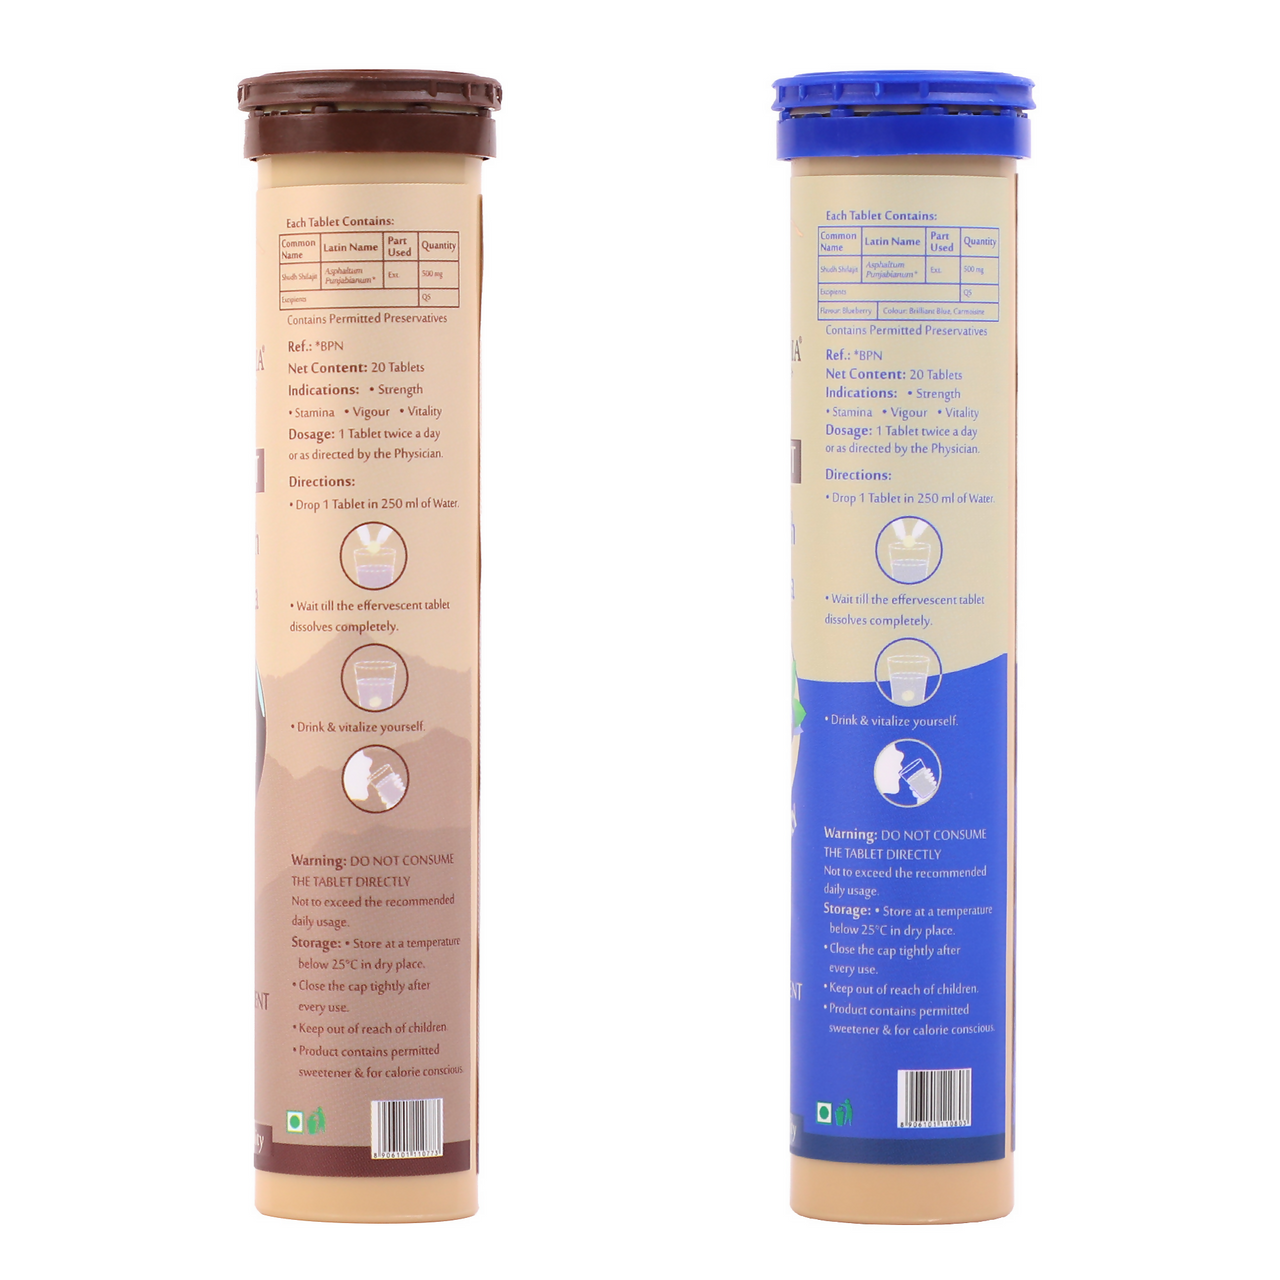 Upakarma Ayurveda Pure SJ Effervescent Tablets in 2 Unique Flavors (Pure SJ & Blueberry) Combo - Distacart